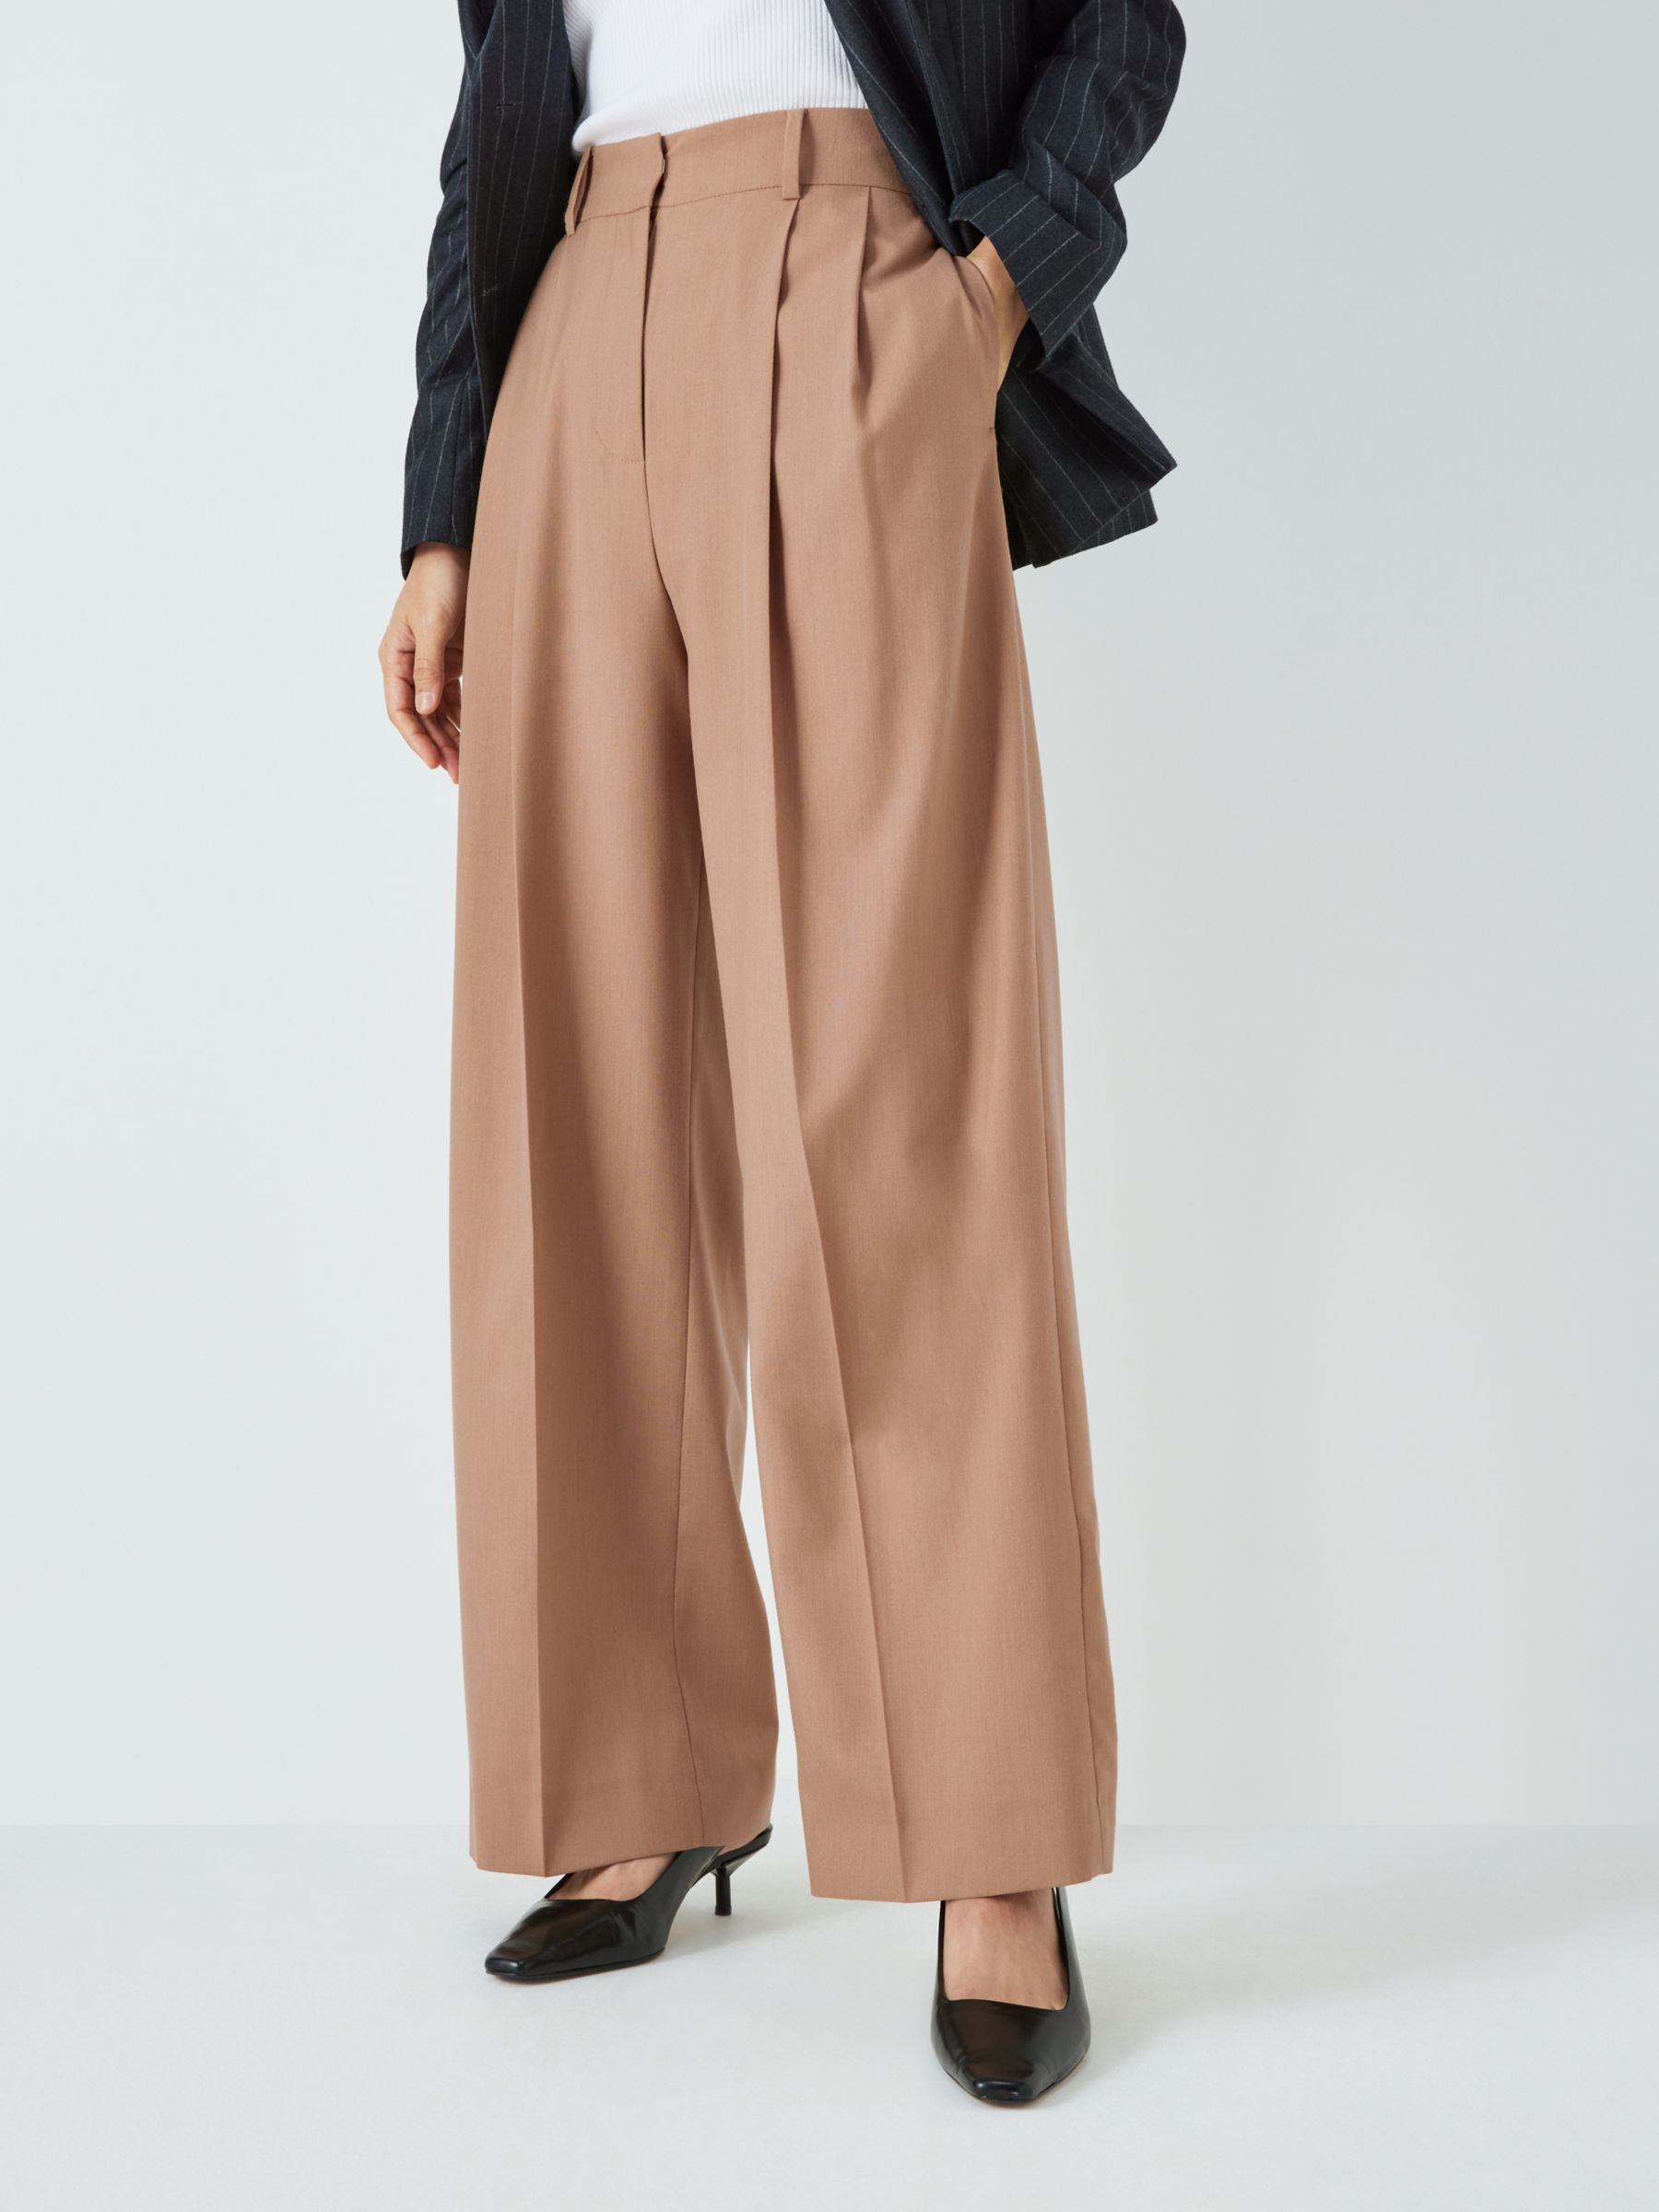 Buy Tanming Women's Thick Wool Blend Cropped Wide Leg Pant Trousers  (Medium, Brown) at